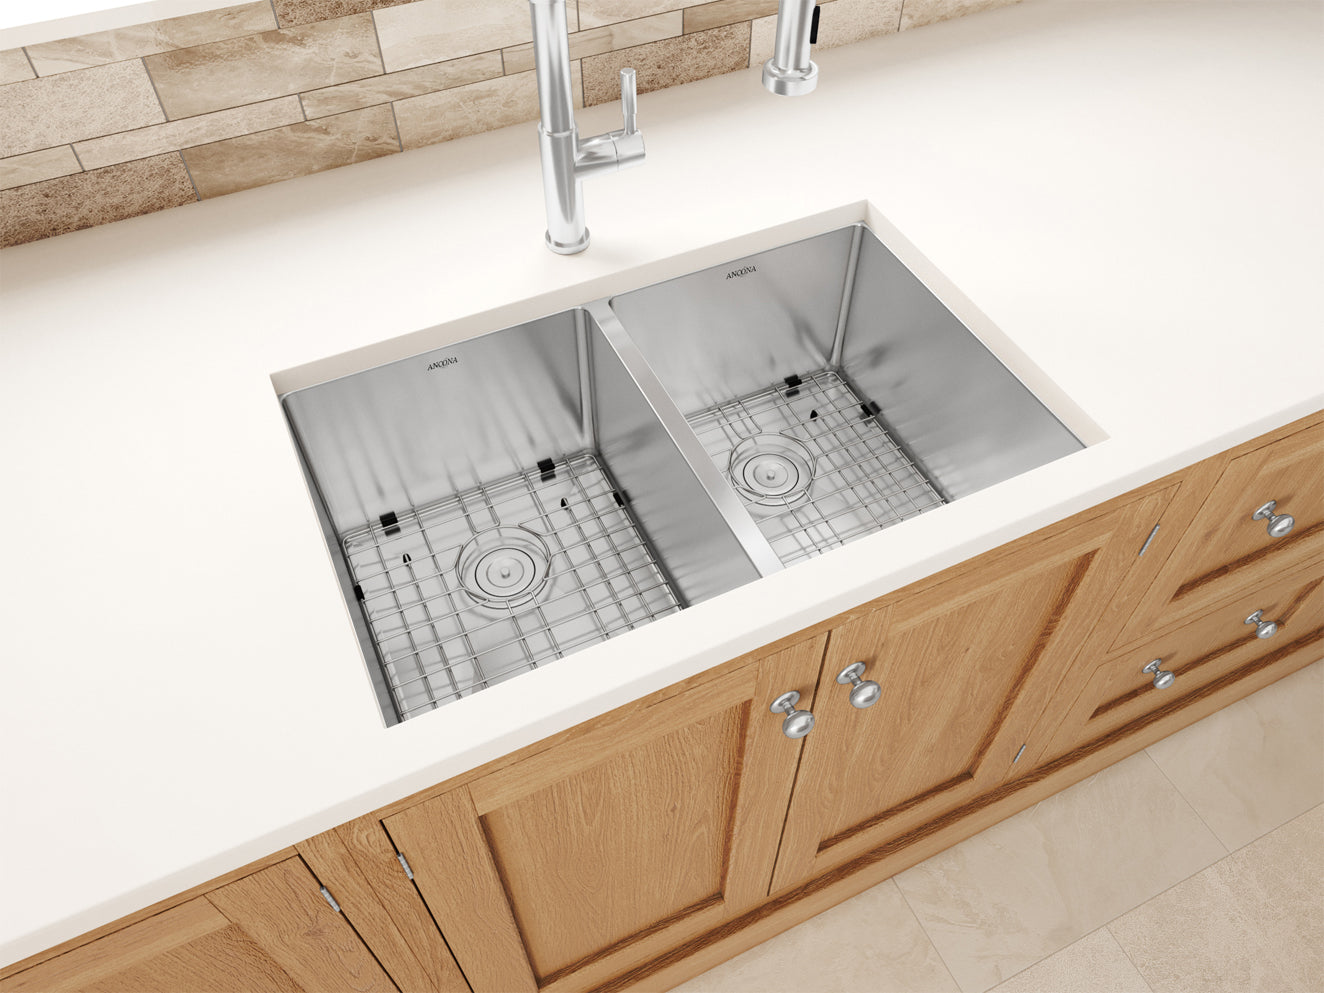 Prestige Series Undermount Stainless Steel 28 in. 50/50 Double Bowl Kitchen Sink in Satin Finish with Grids and Strainers